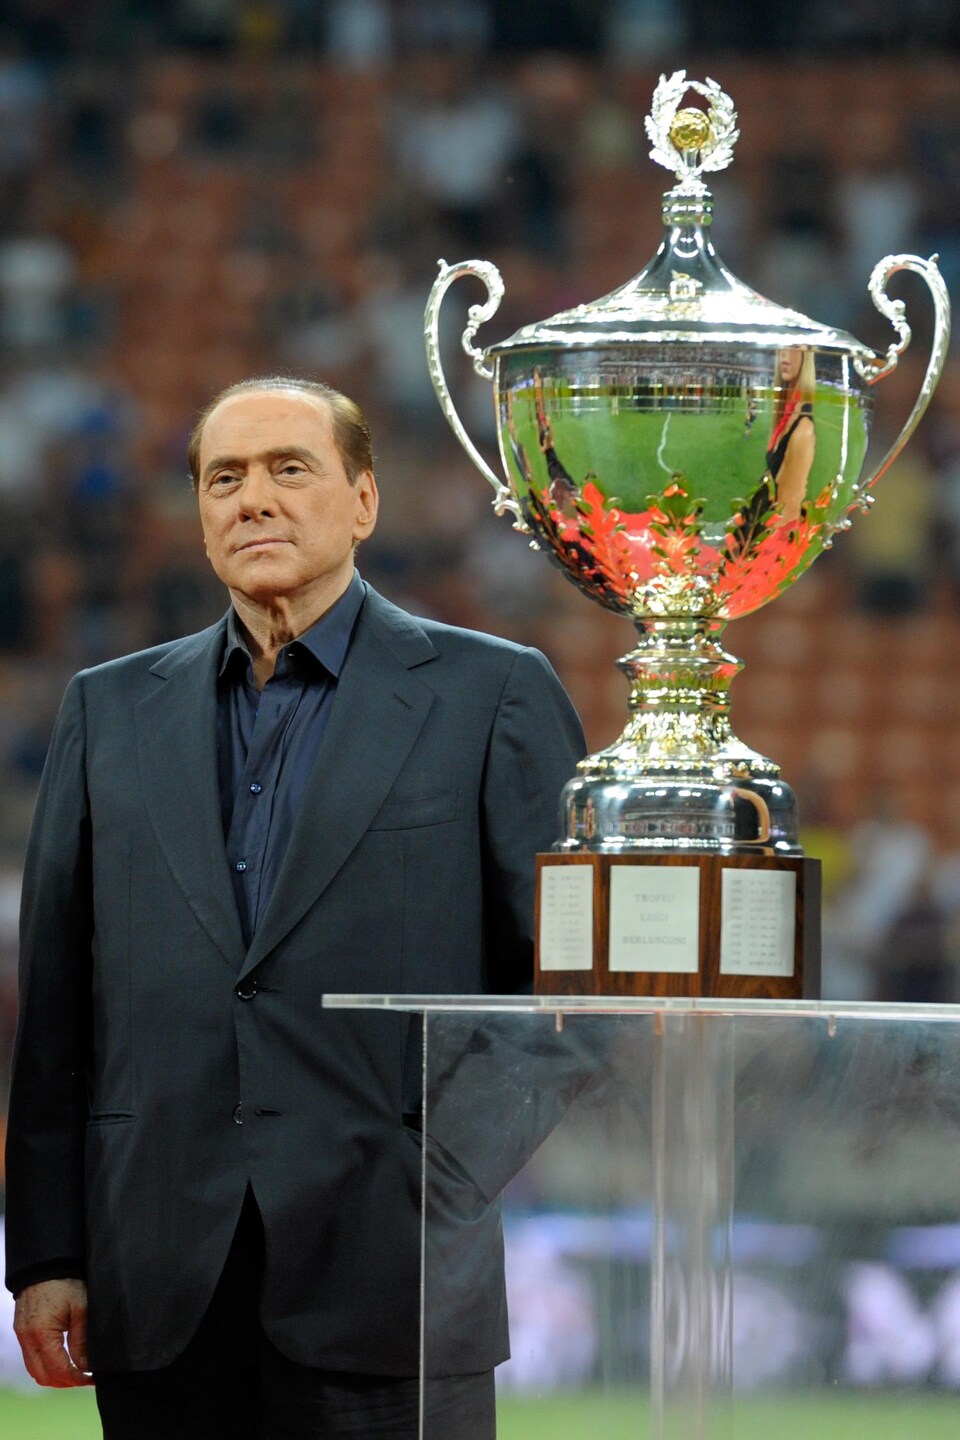 Silvio Berlusconi stands behind the trophy.